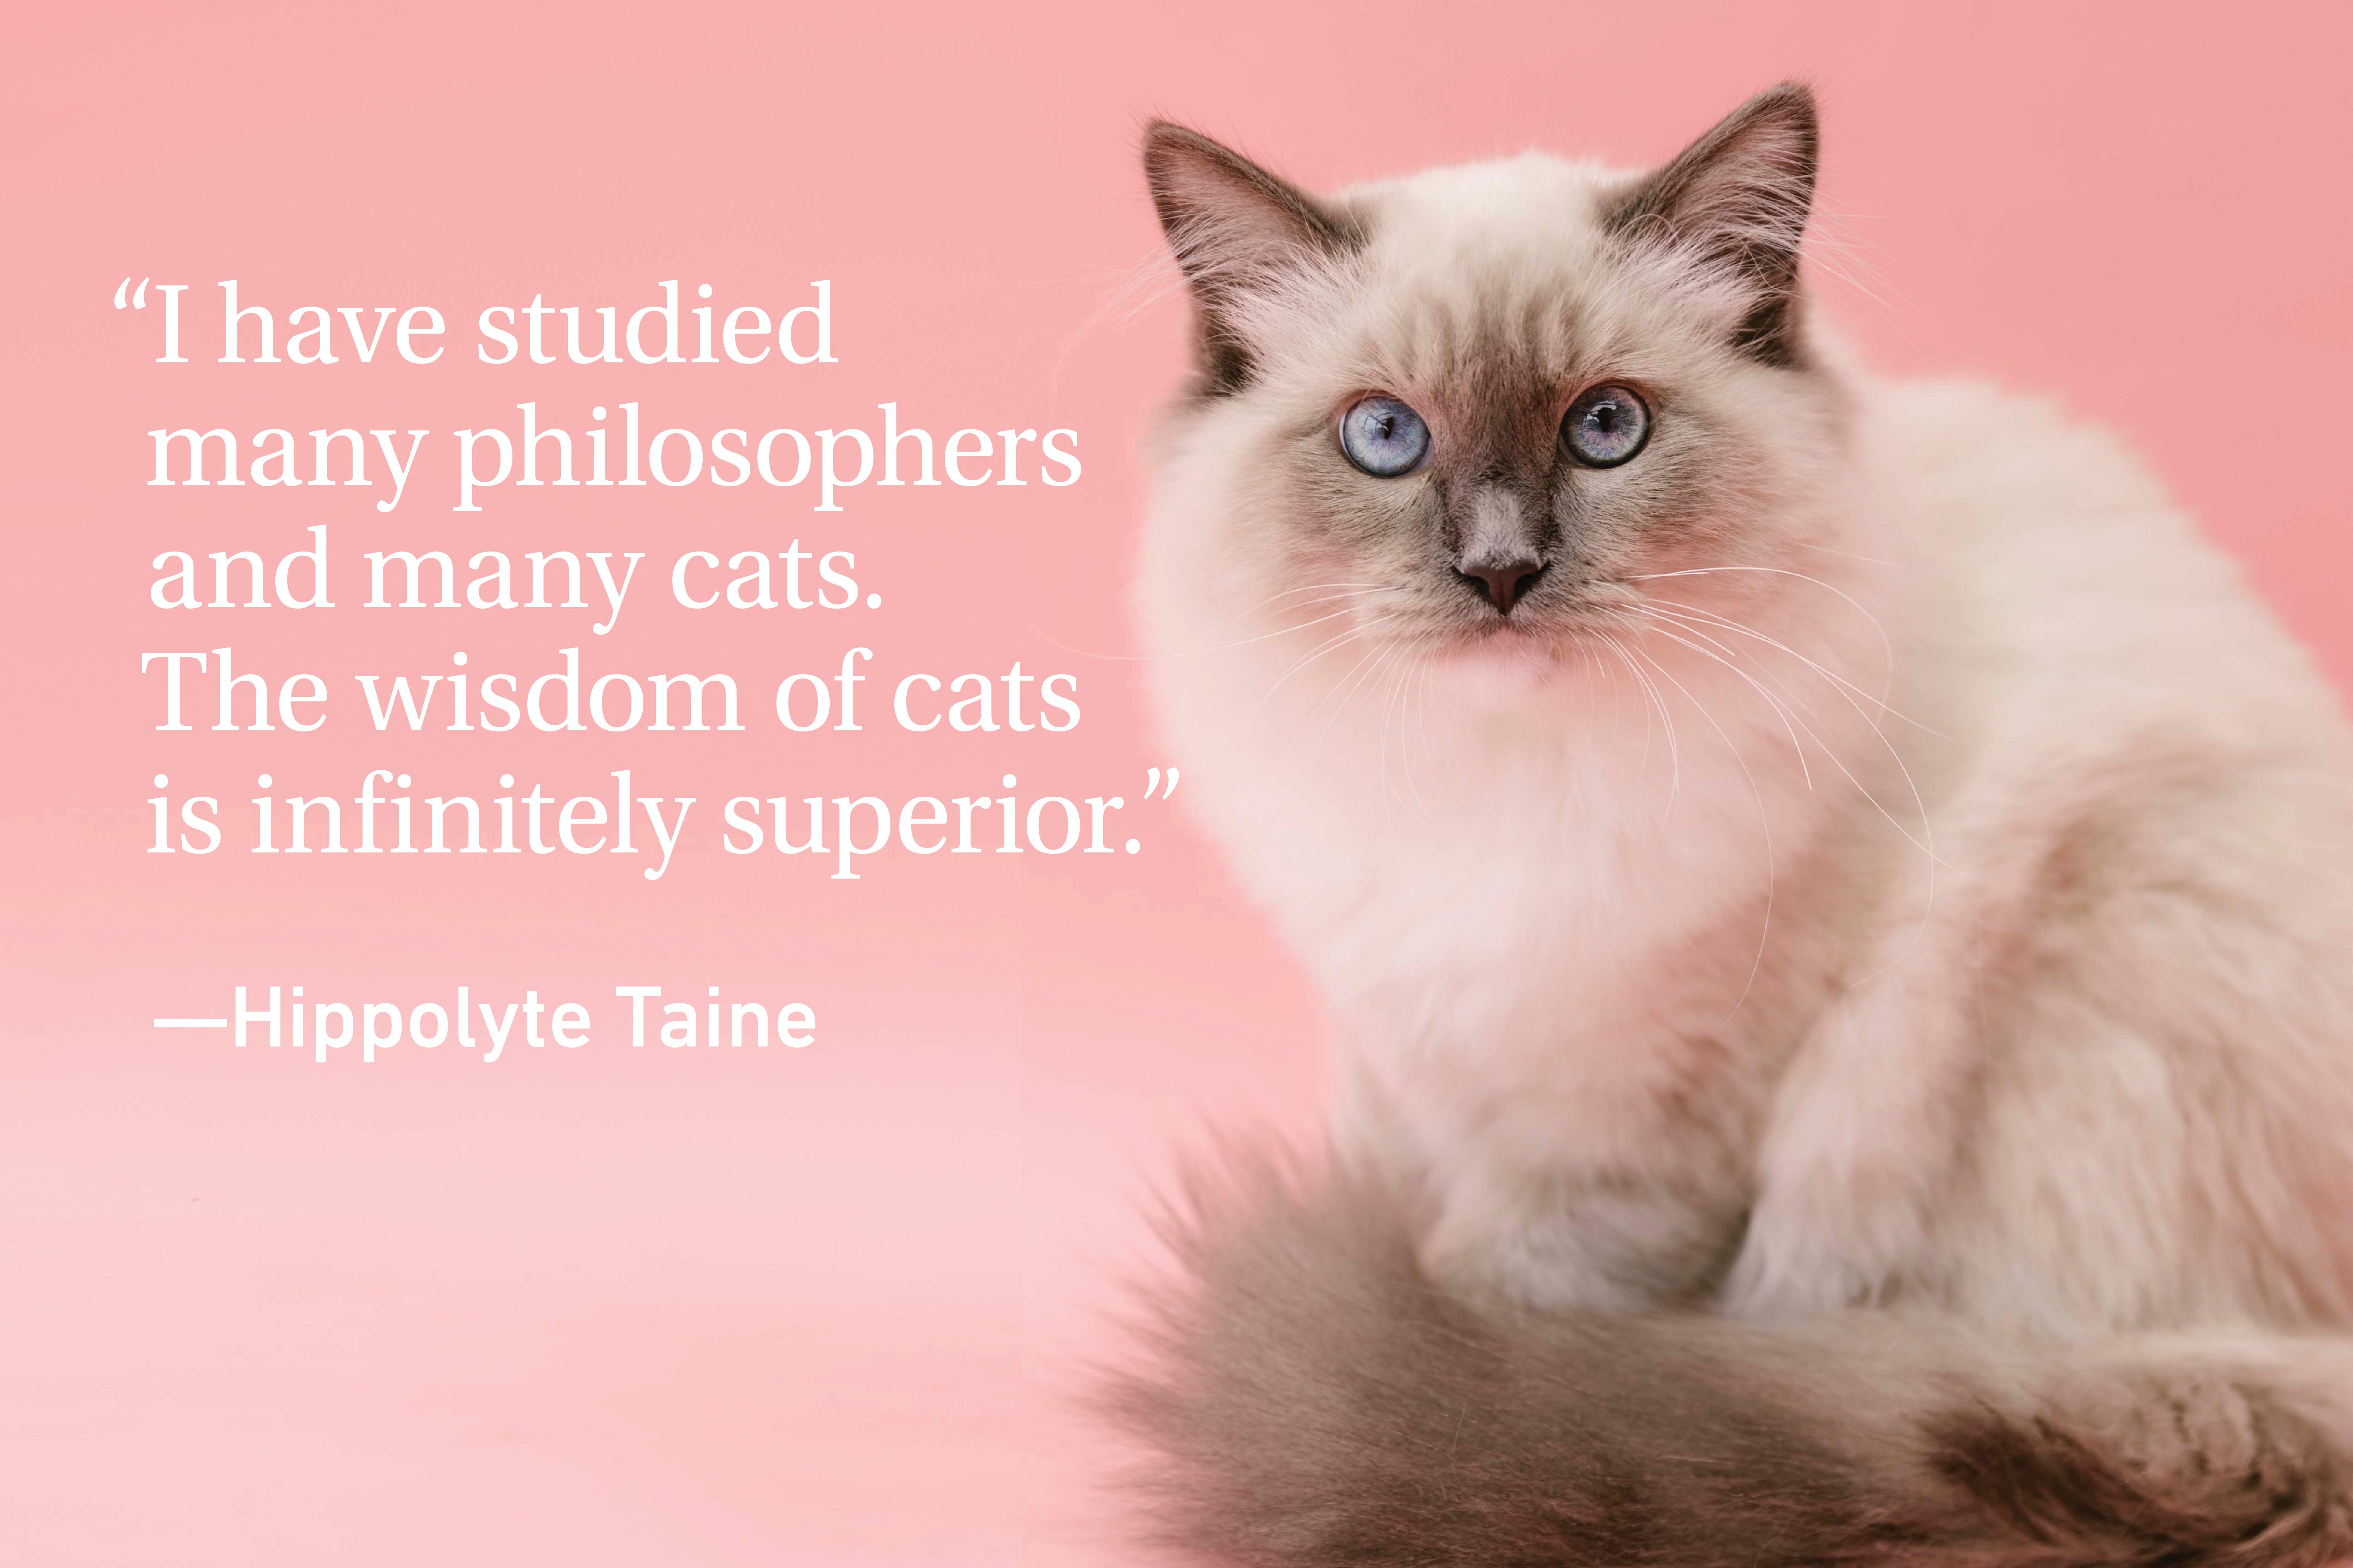 Cat Quotes Every Cat Owner Can Appreciate | Reader's Digest